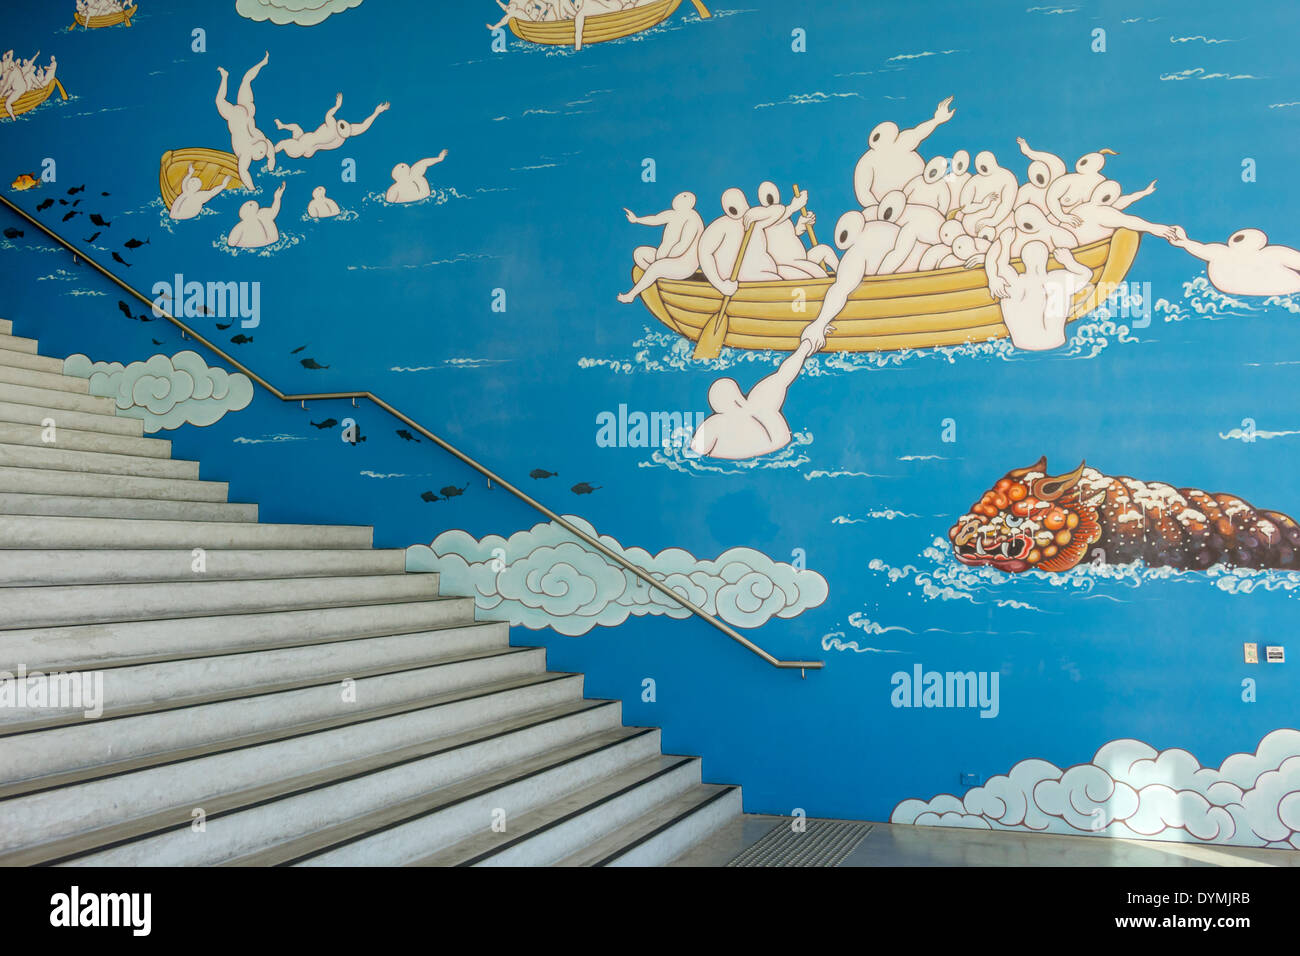 Sydney Australia,West Circular Quay,Museum of Contemporary Art,MCA,mural,entrance,steps stairs staircase,AU140308066 Stock Photo